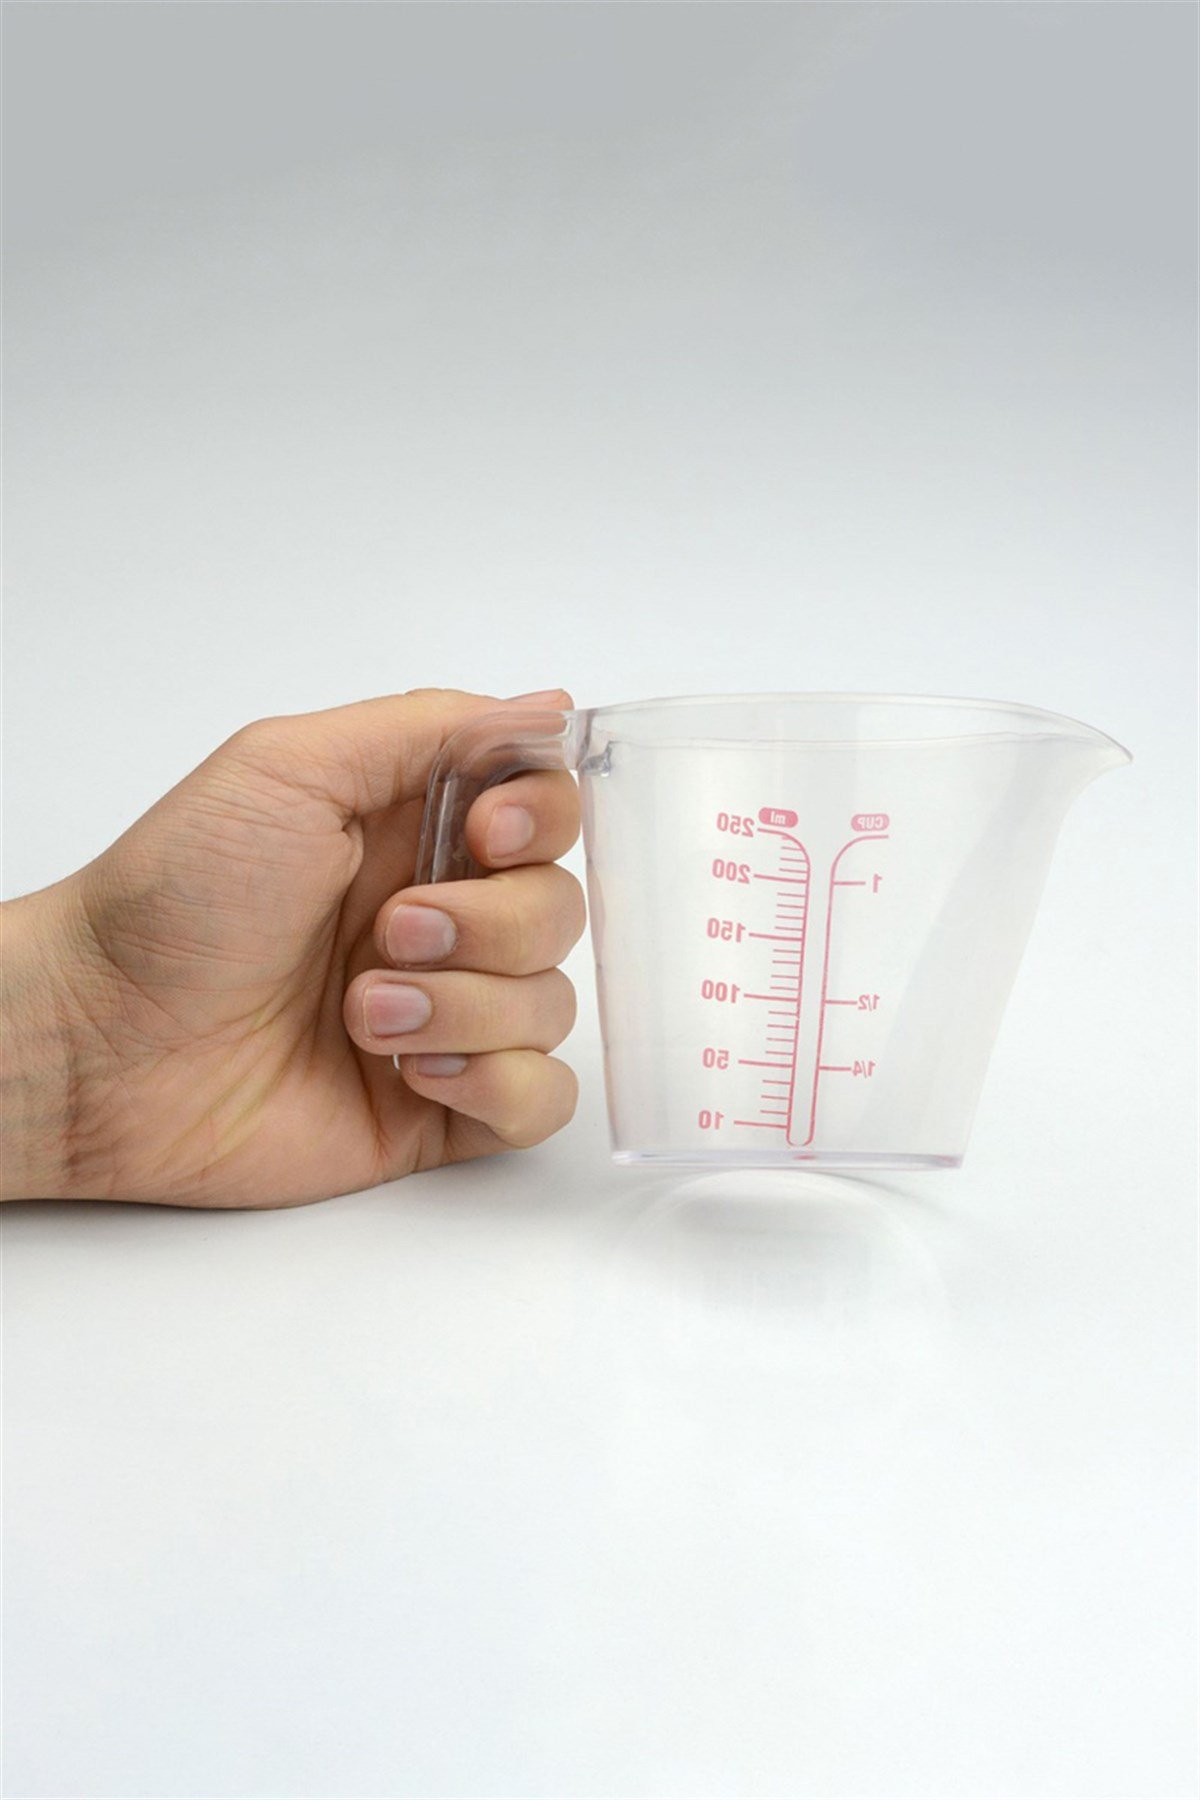 Measuring Cup, 250 ml